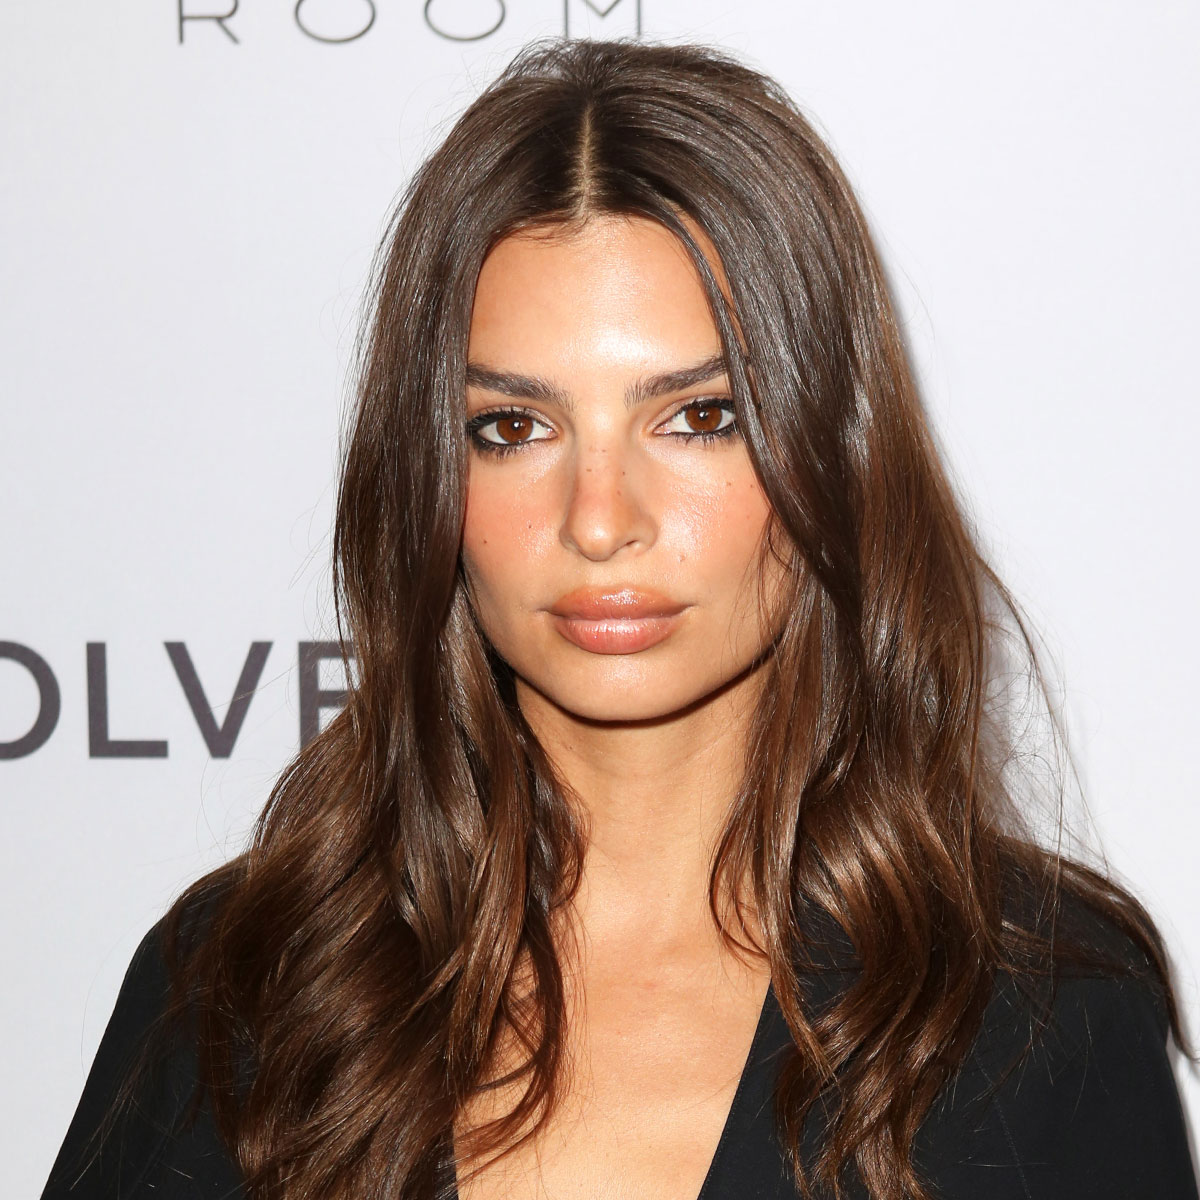 Emily Ratajkowski Strips Down To A Black Bra And Strappy Underwear For Her  Latest Victoria's Secret Shoot—Fans Are Calling Her 'Perfect' - SHEfinds